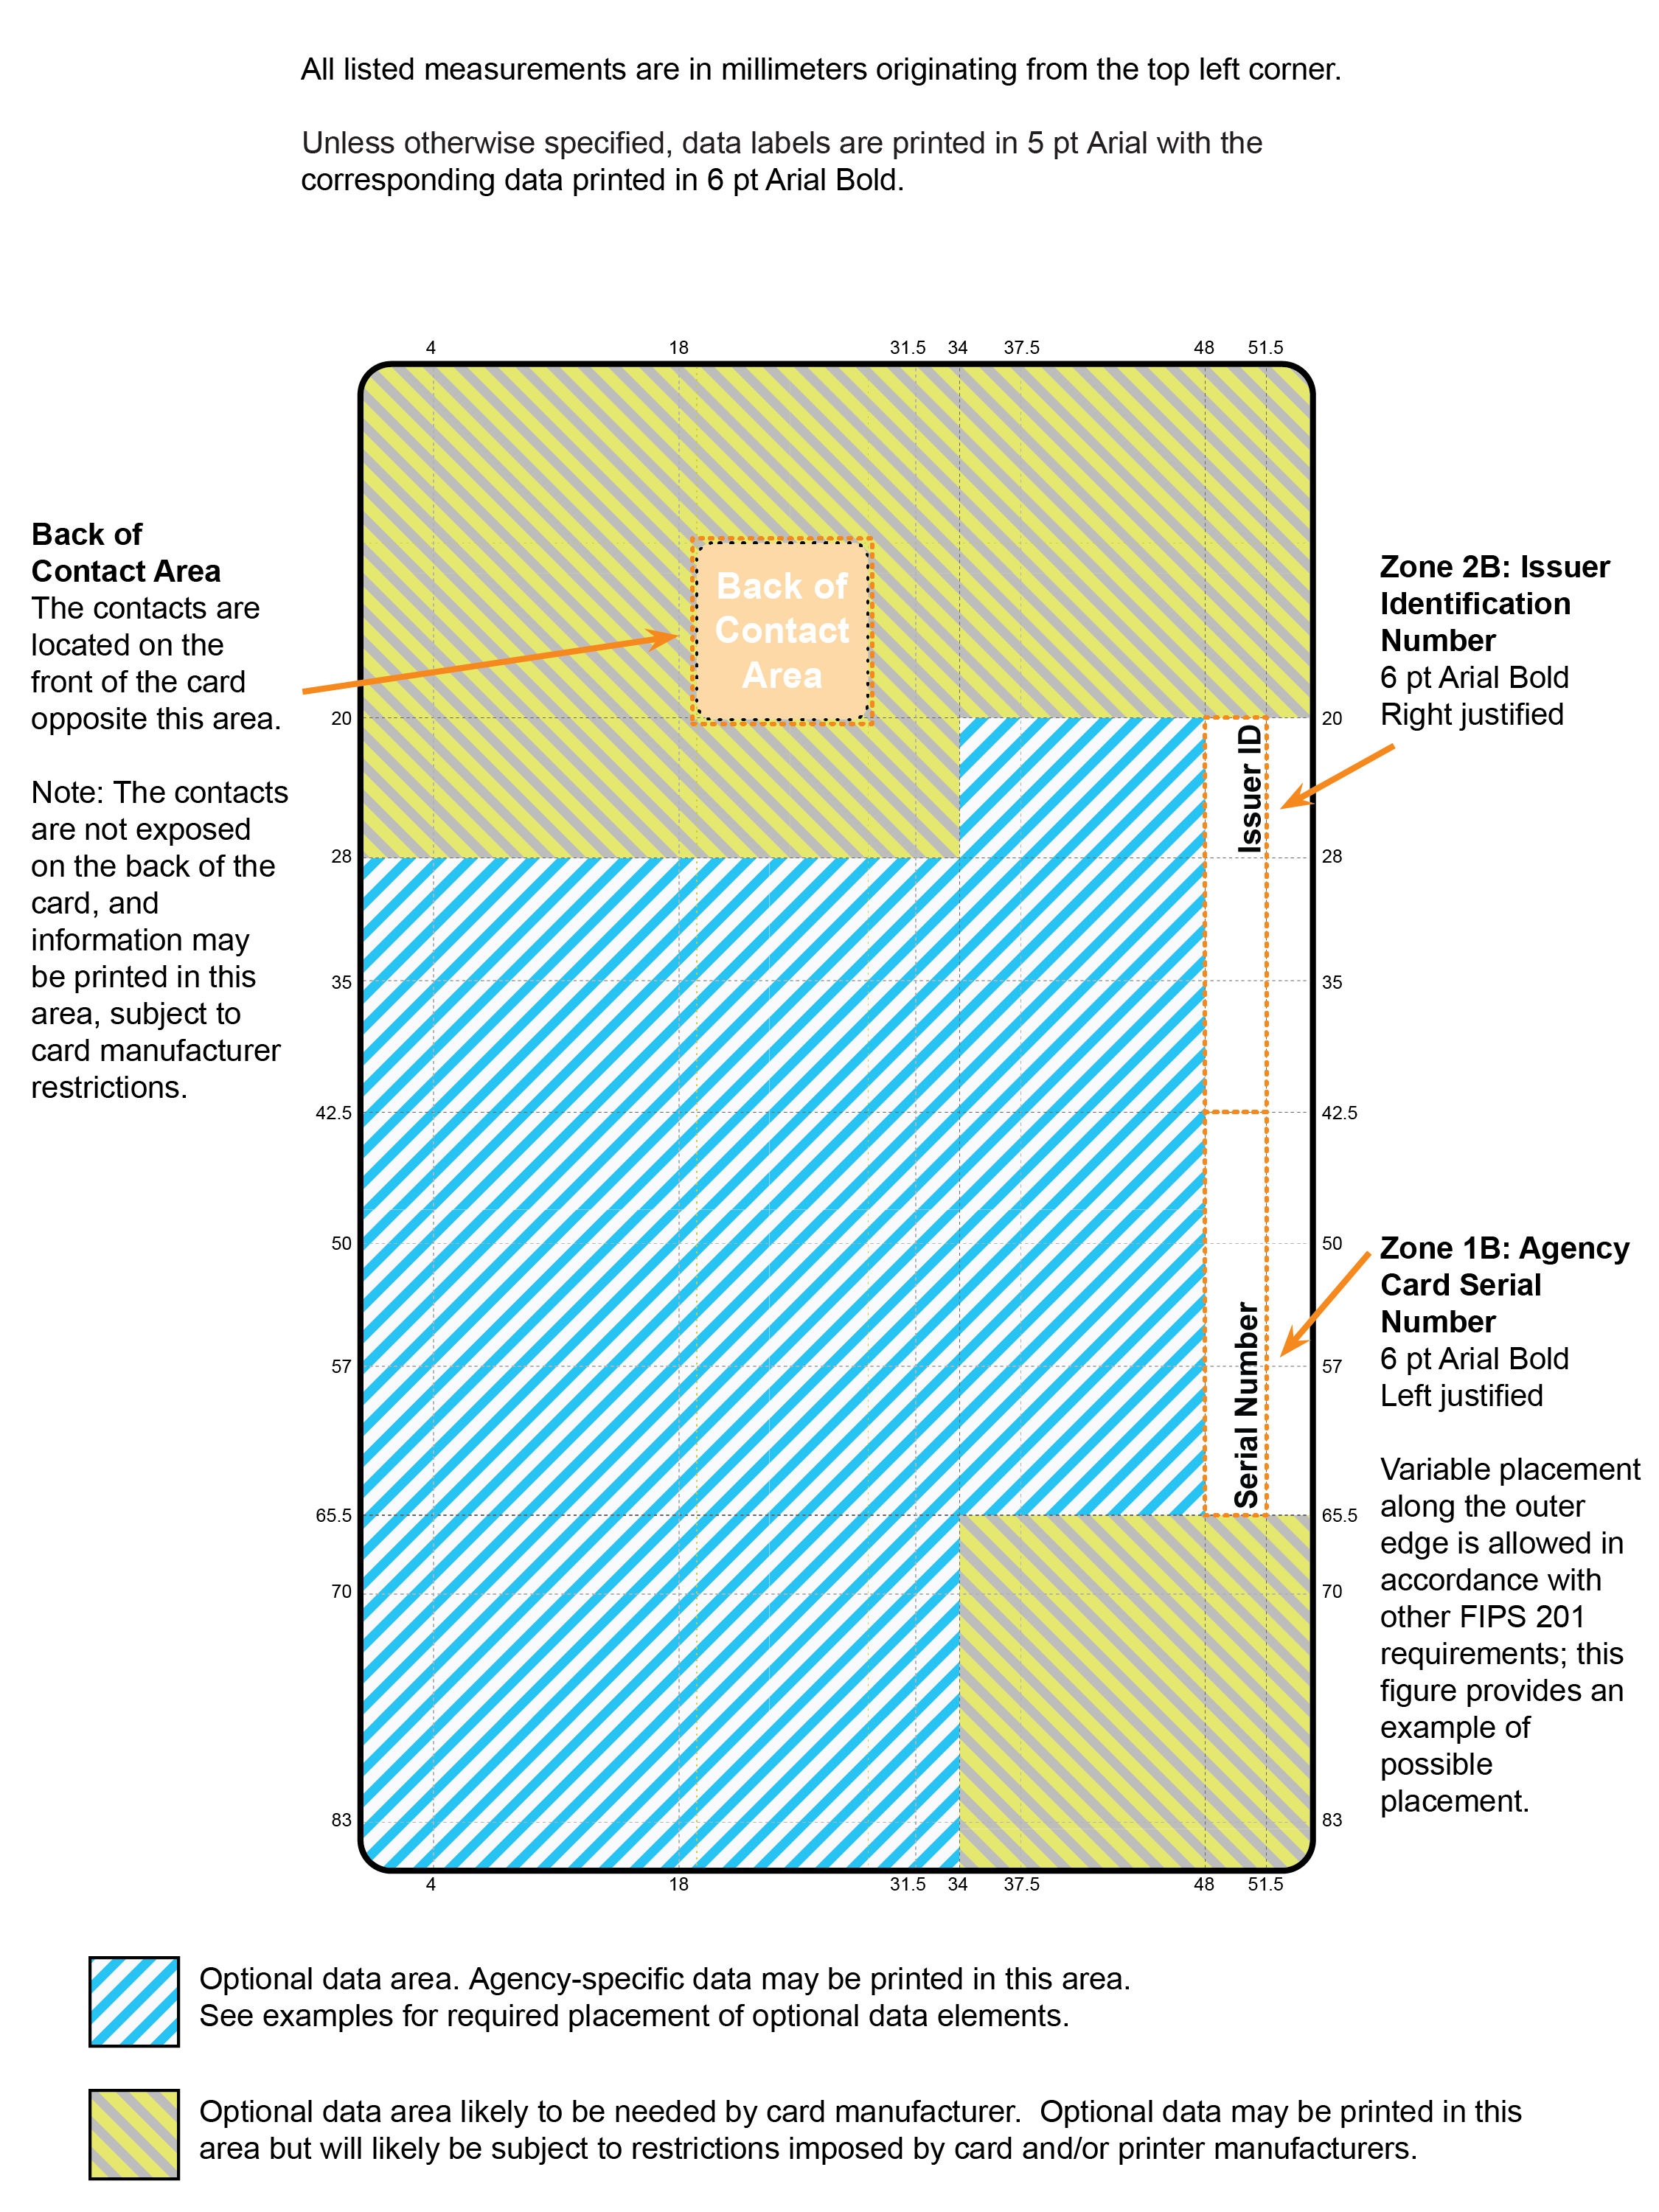 Diagram of Printable Areas and Required Data on back of card.